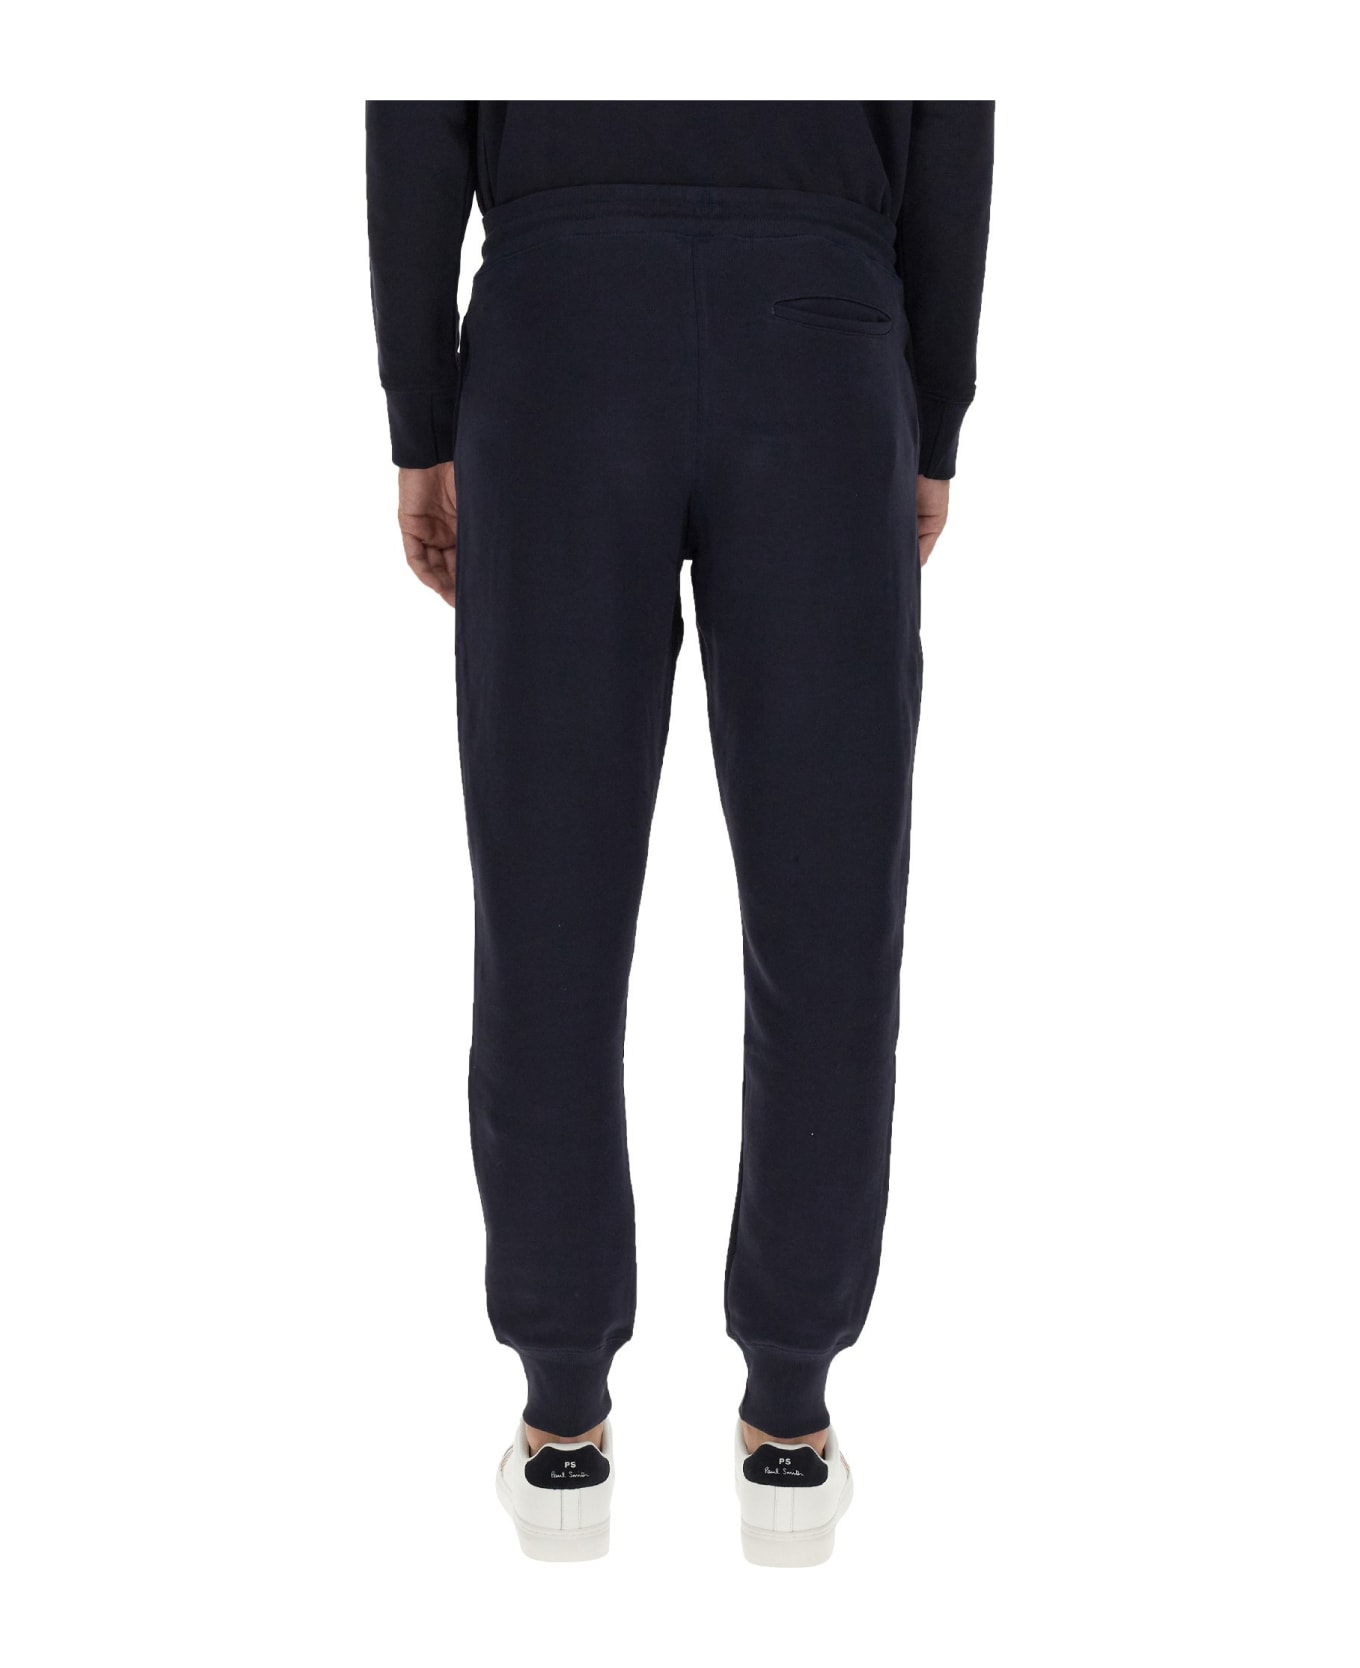 PS by Paul Smith Jogging Pants - Blu Navy